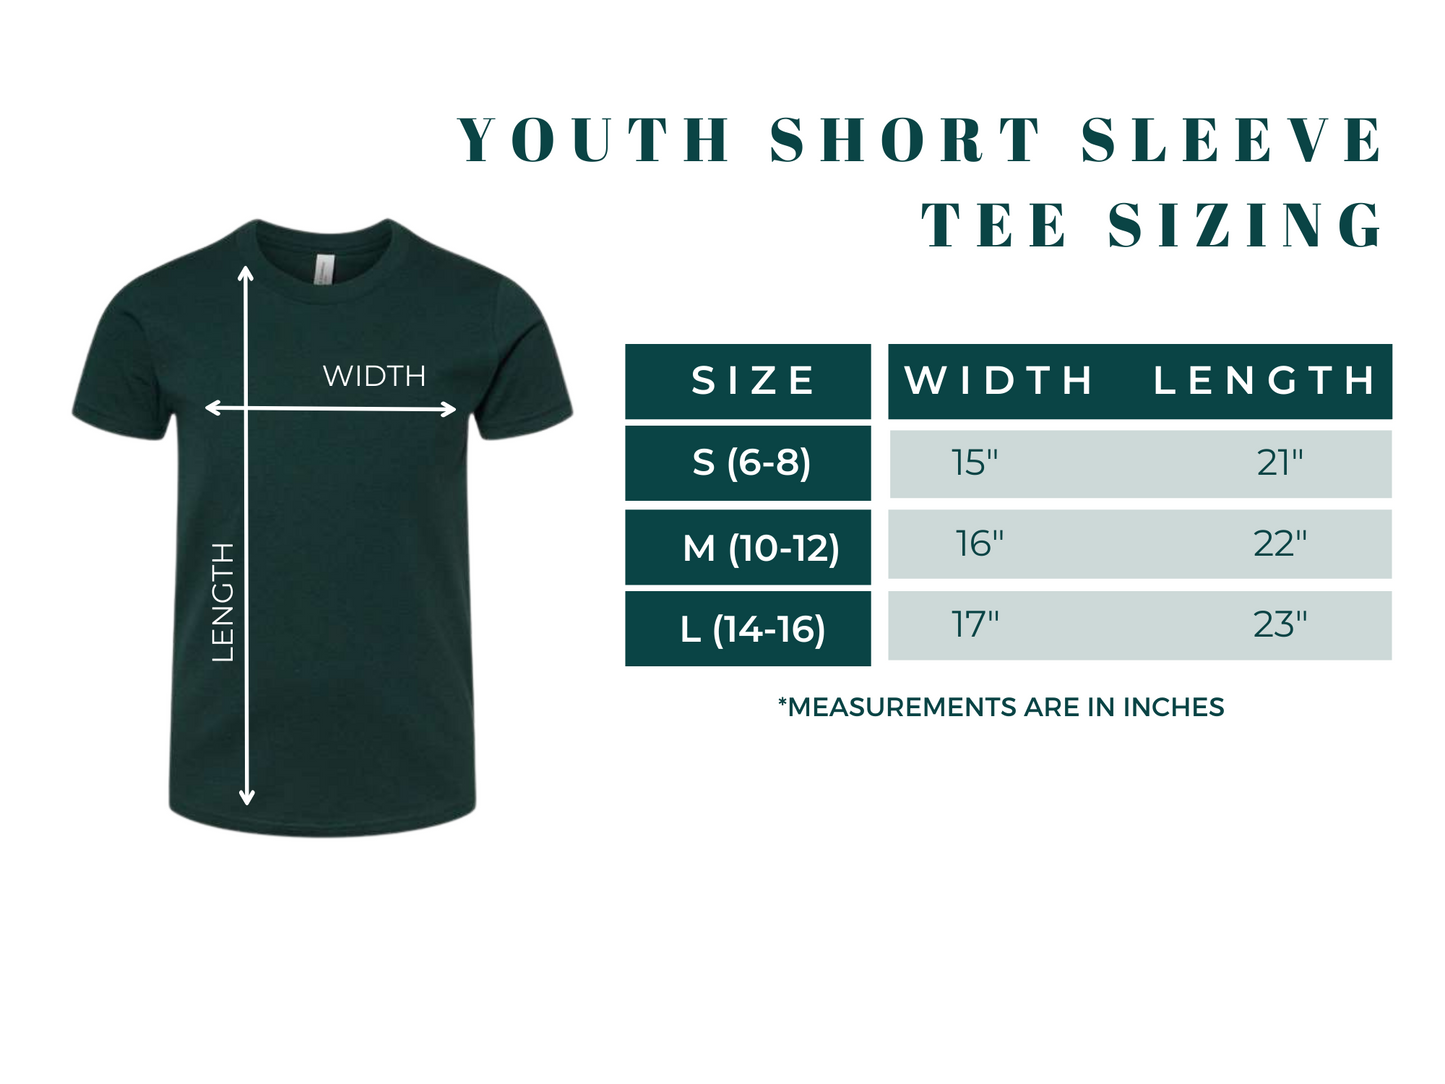 Fifth Grade Vibes | Short Sleeve Youth Tee